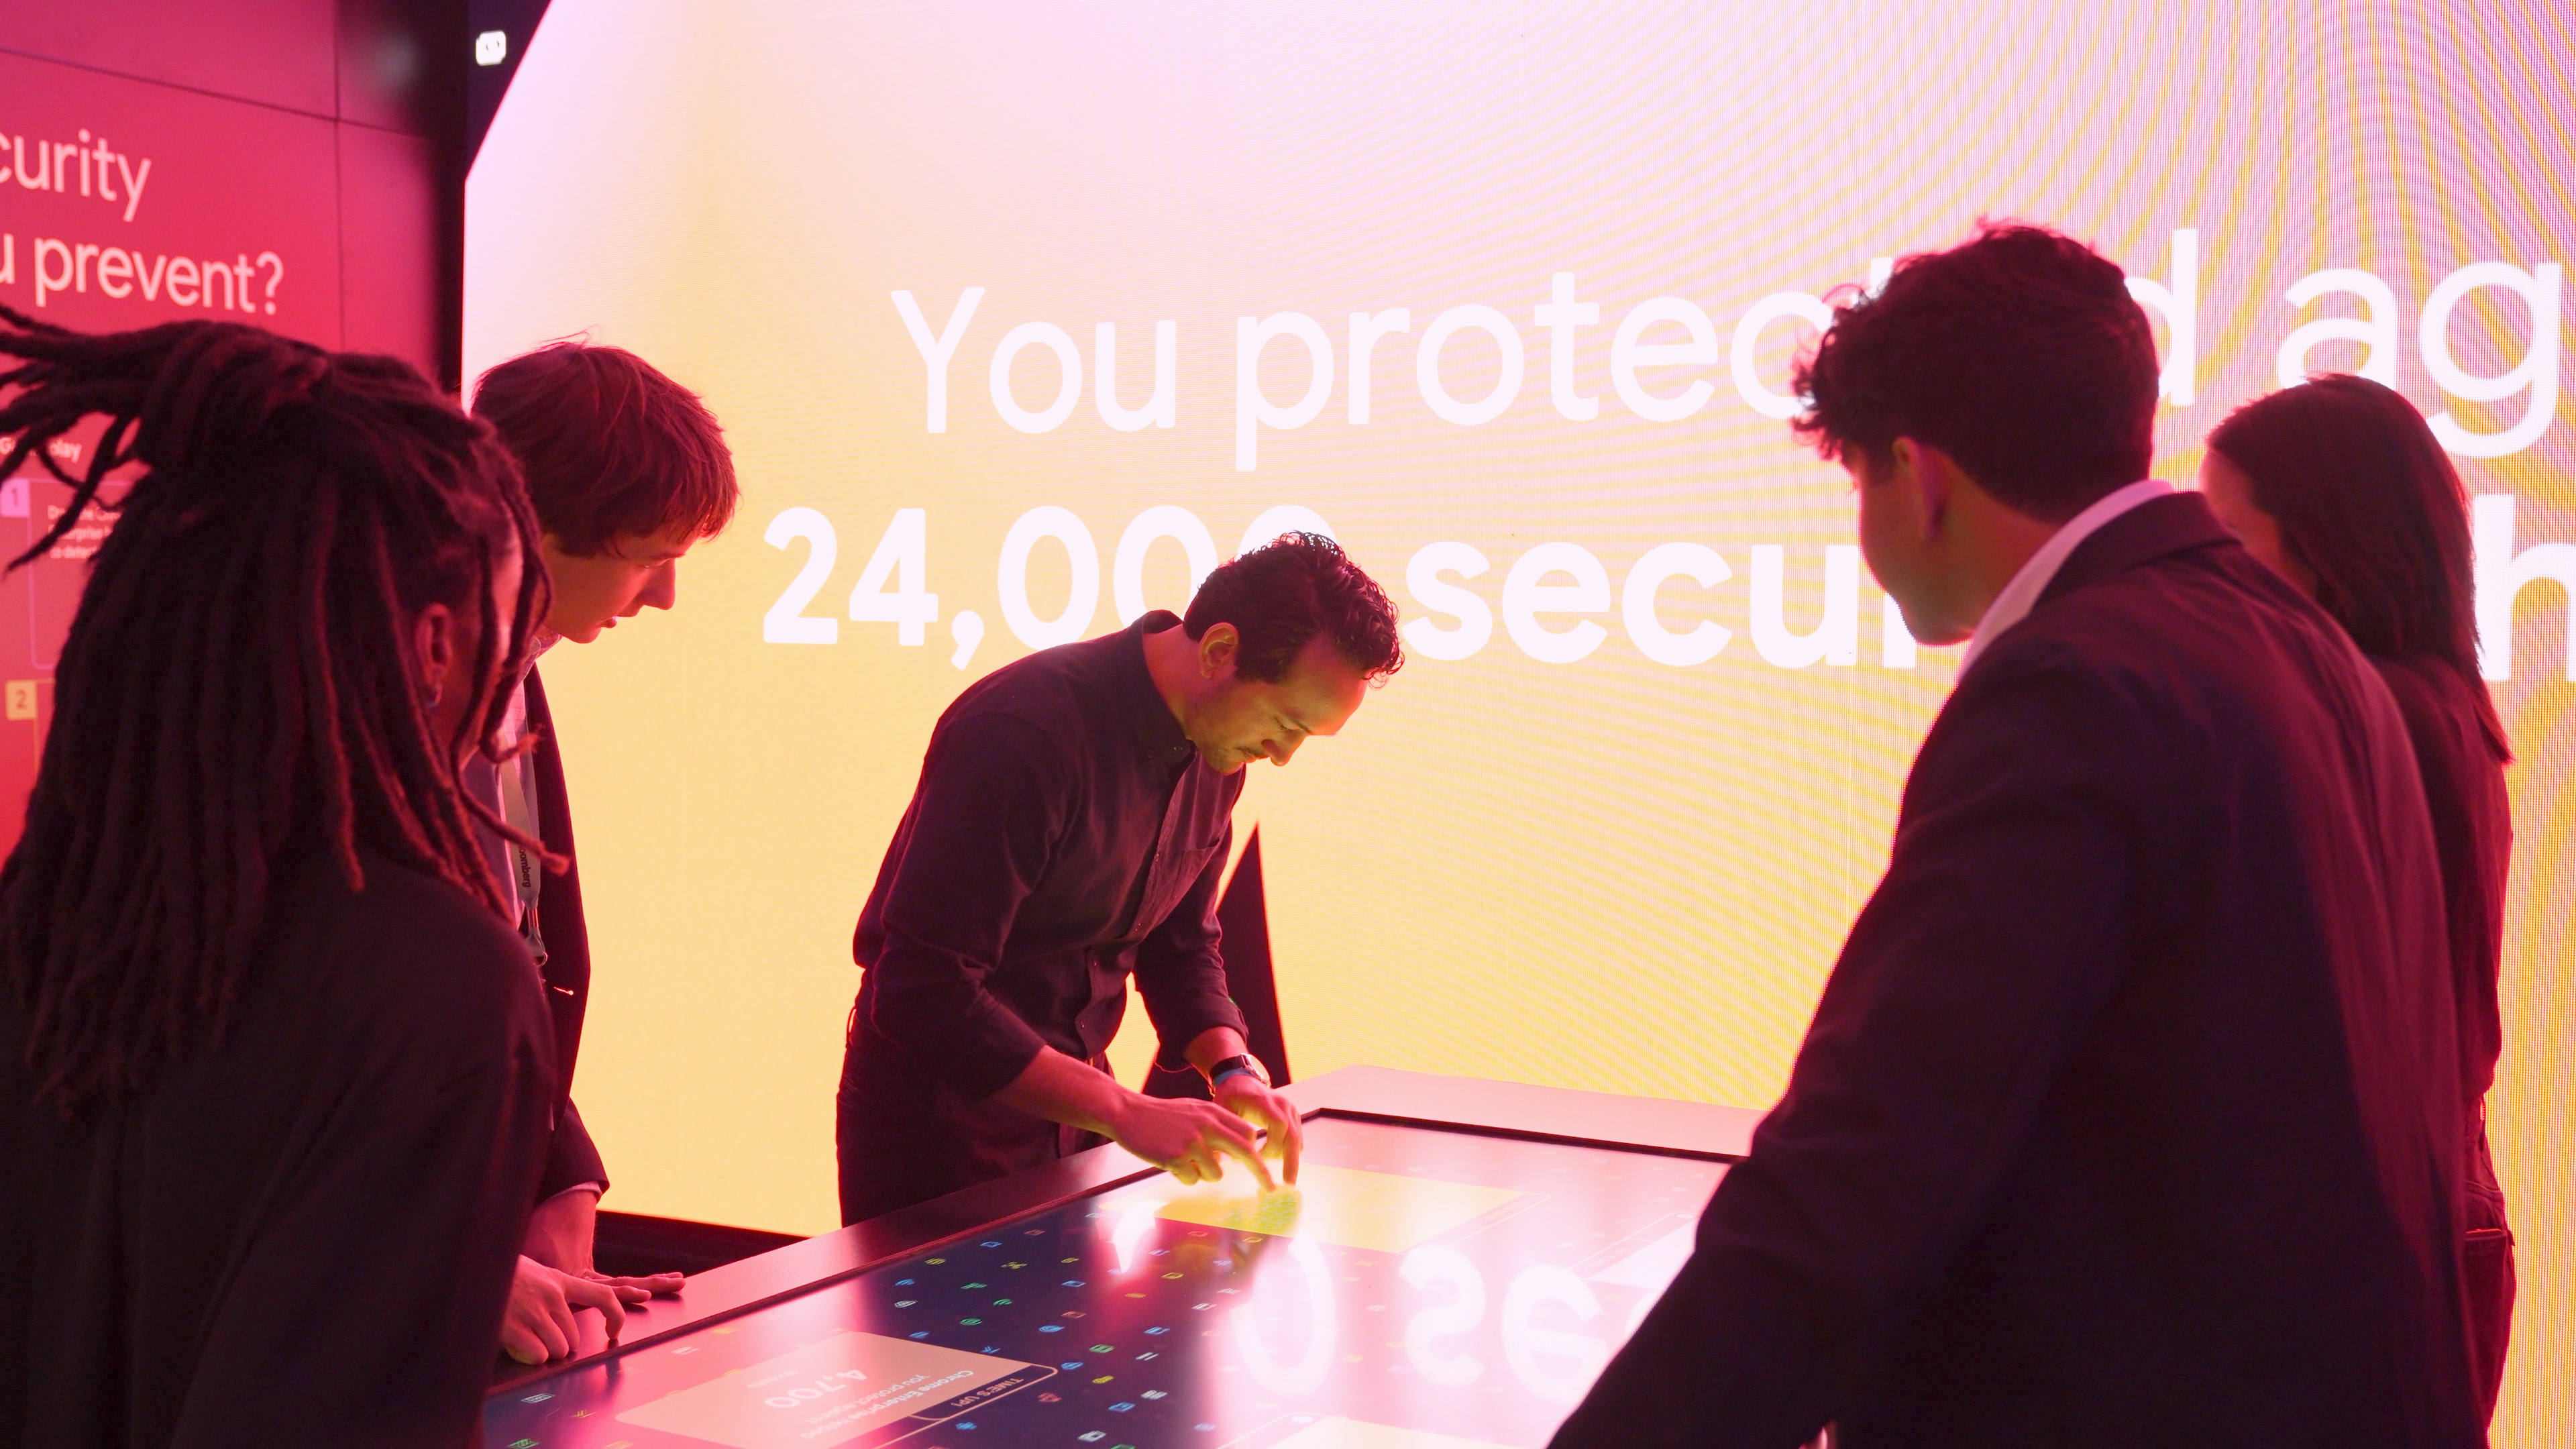 Four Players and a guest stand around the touchscreen table display in front of the big LED screen. The game just finished and one player is entering their team name to submit the score to the leaderboard.